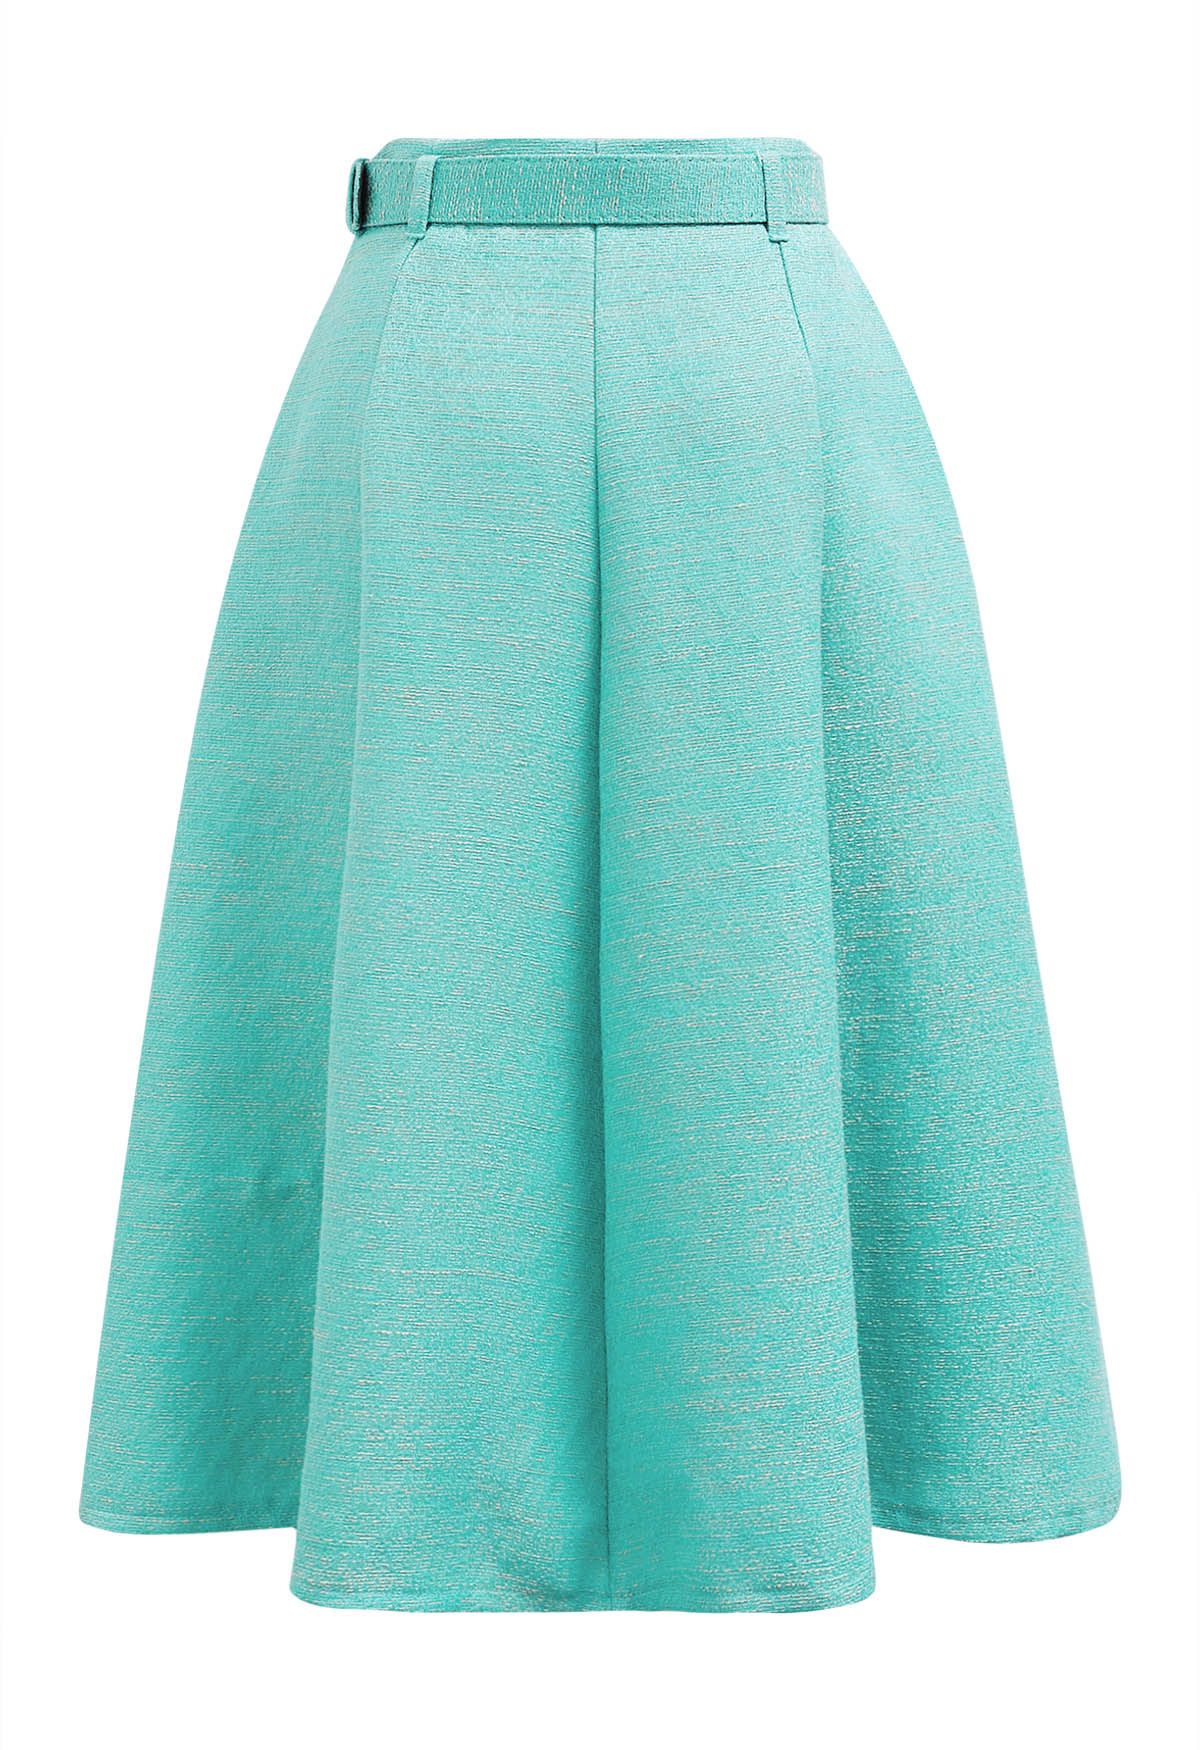 Shimmer Tweed Belted A-Line Midi Skirt in Turquoise